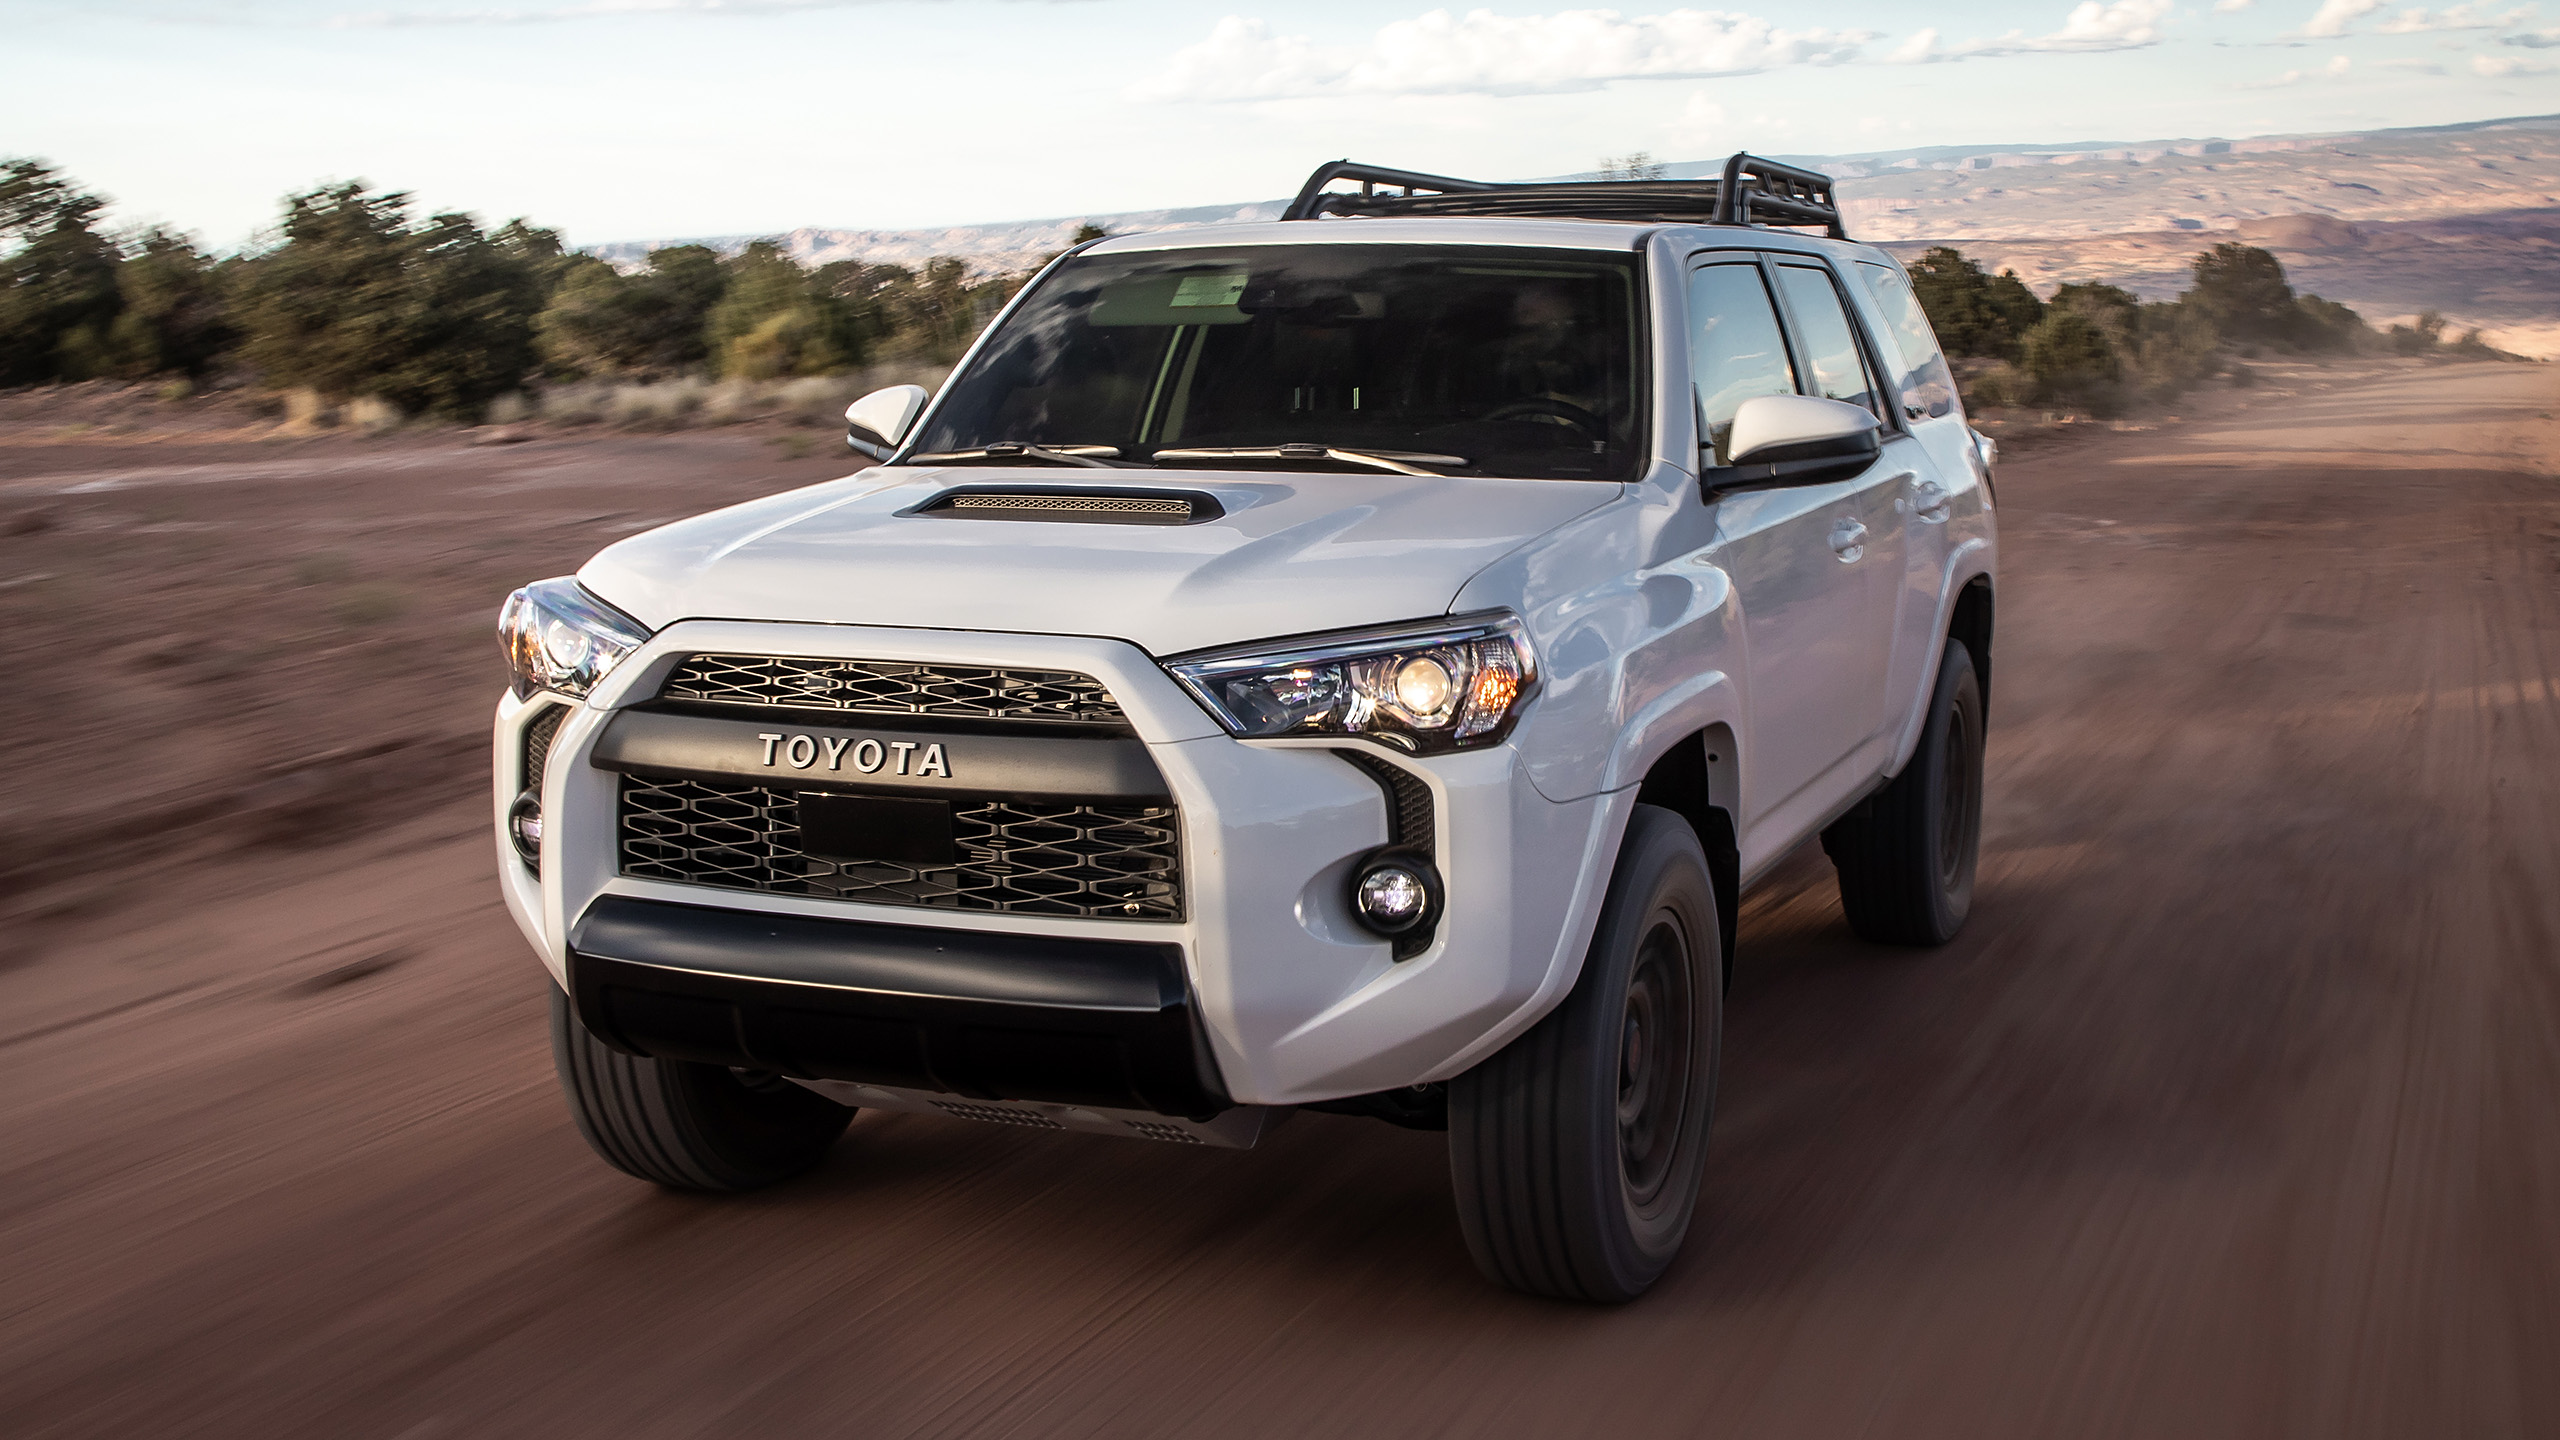 2020 4Runner First Drive Review  Photos, specs, impressions  Autoblog